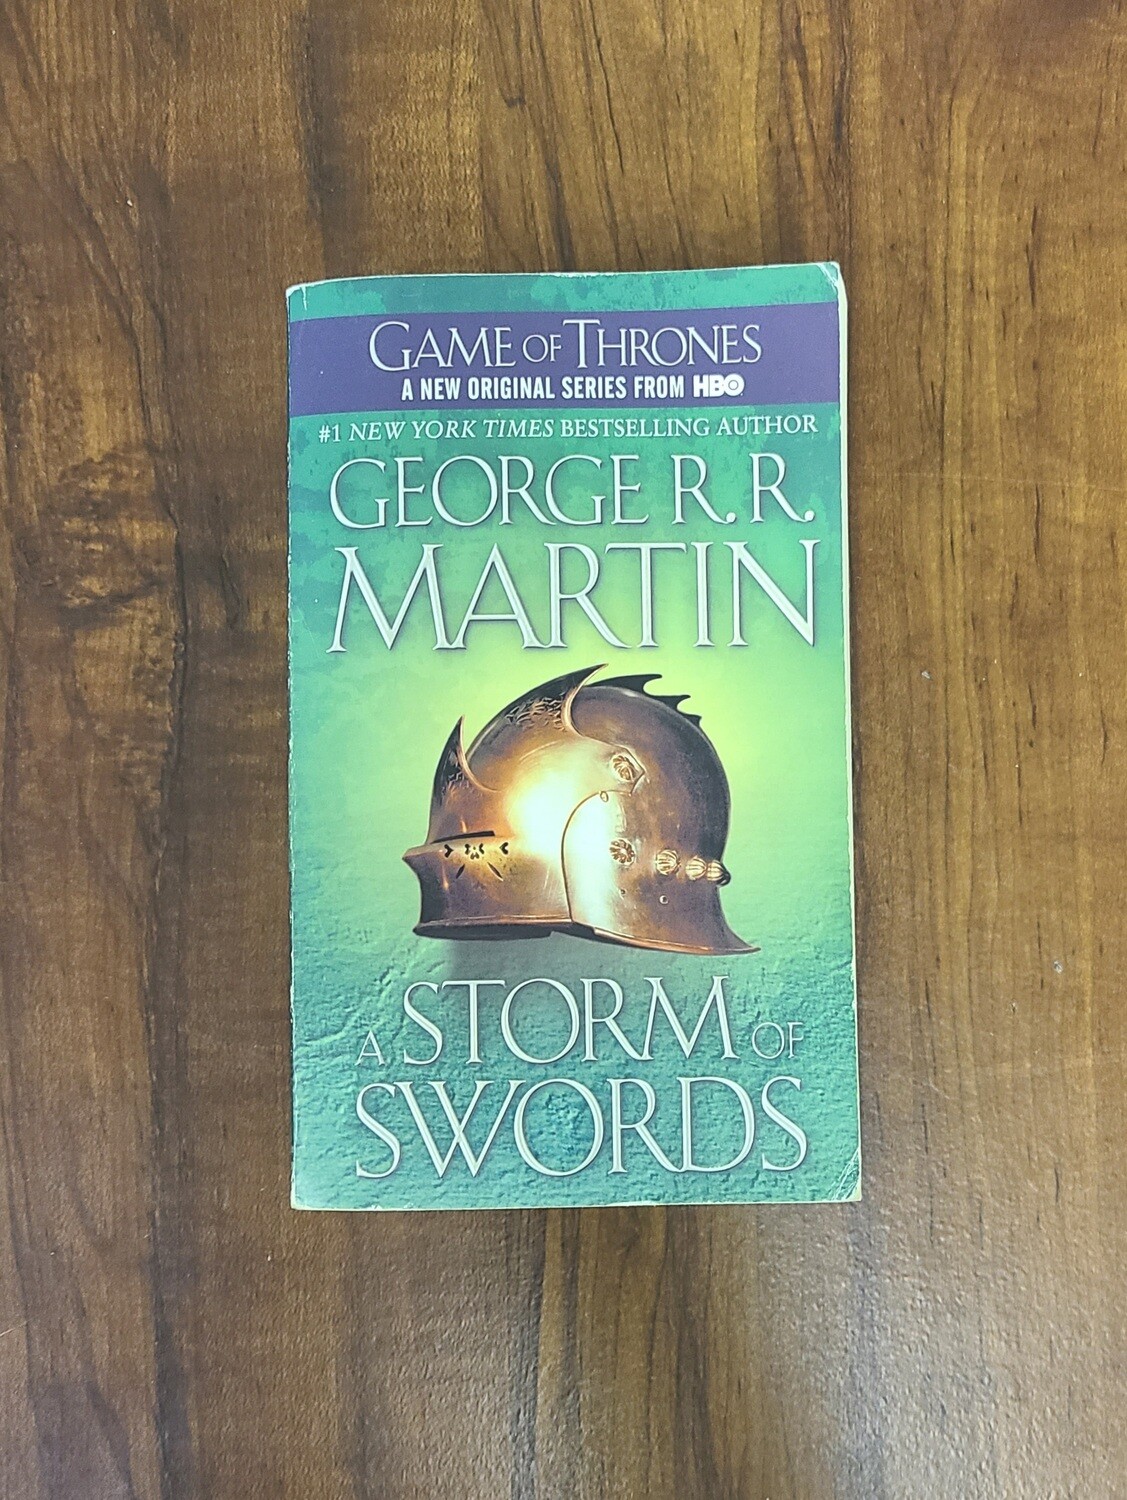 A Storm of Swords by George R. R. Martin